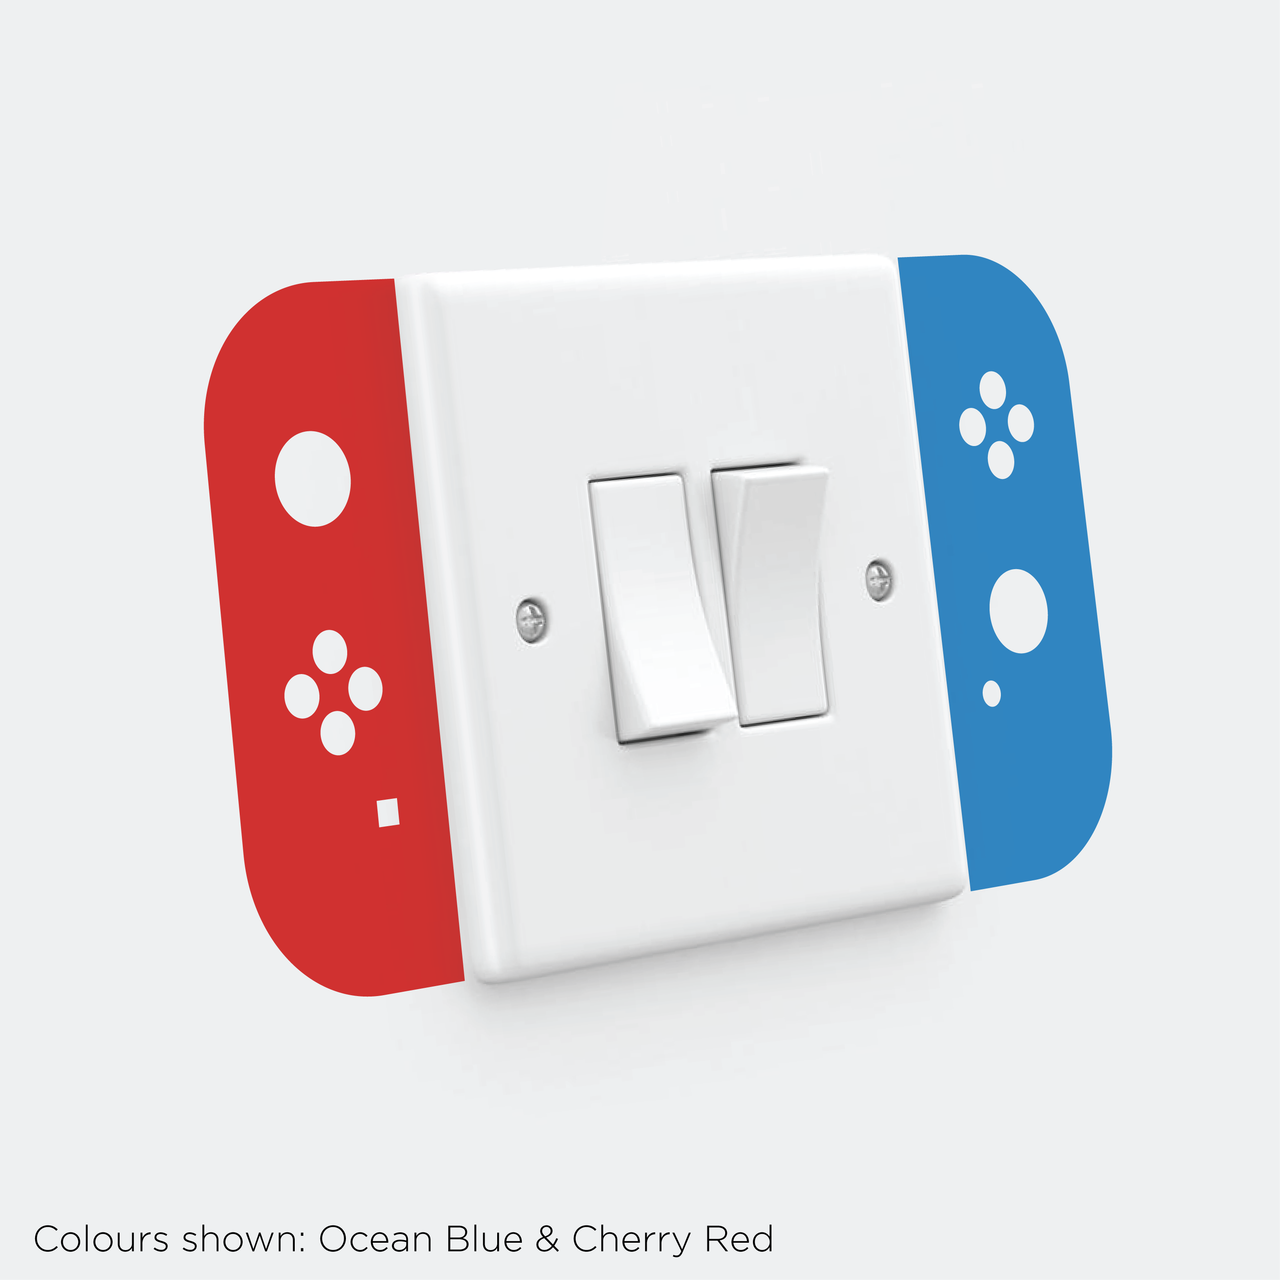 Gaming Light Switch Controller Wall Decal